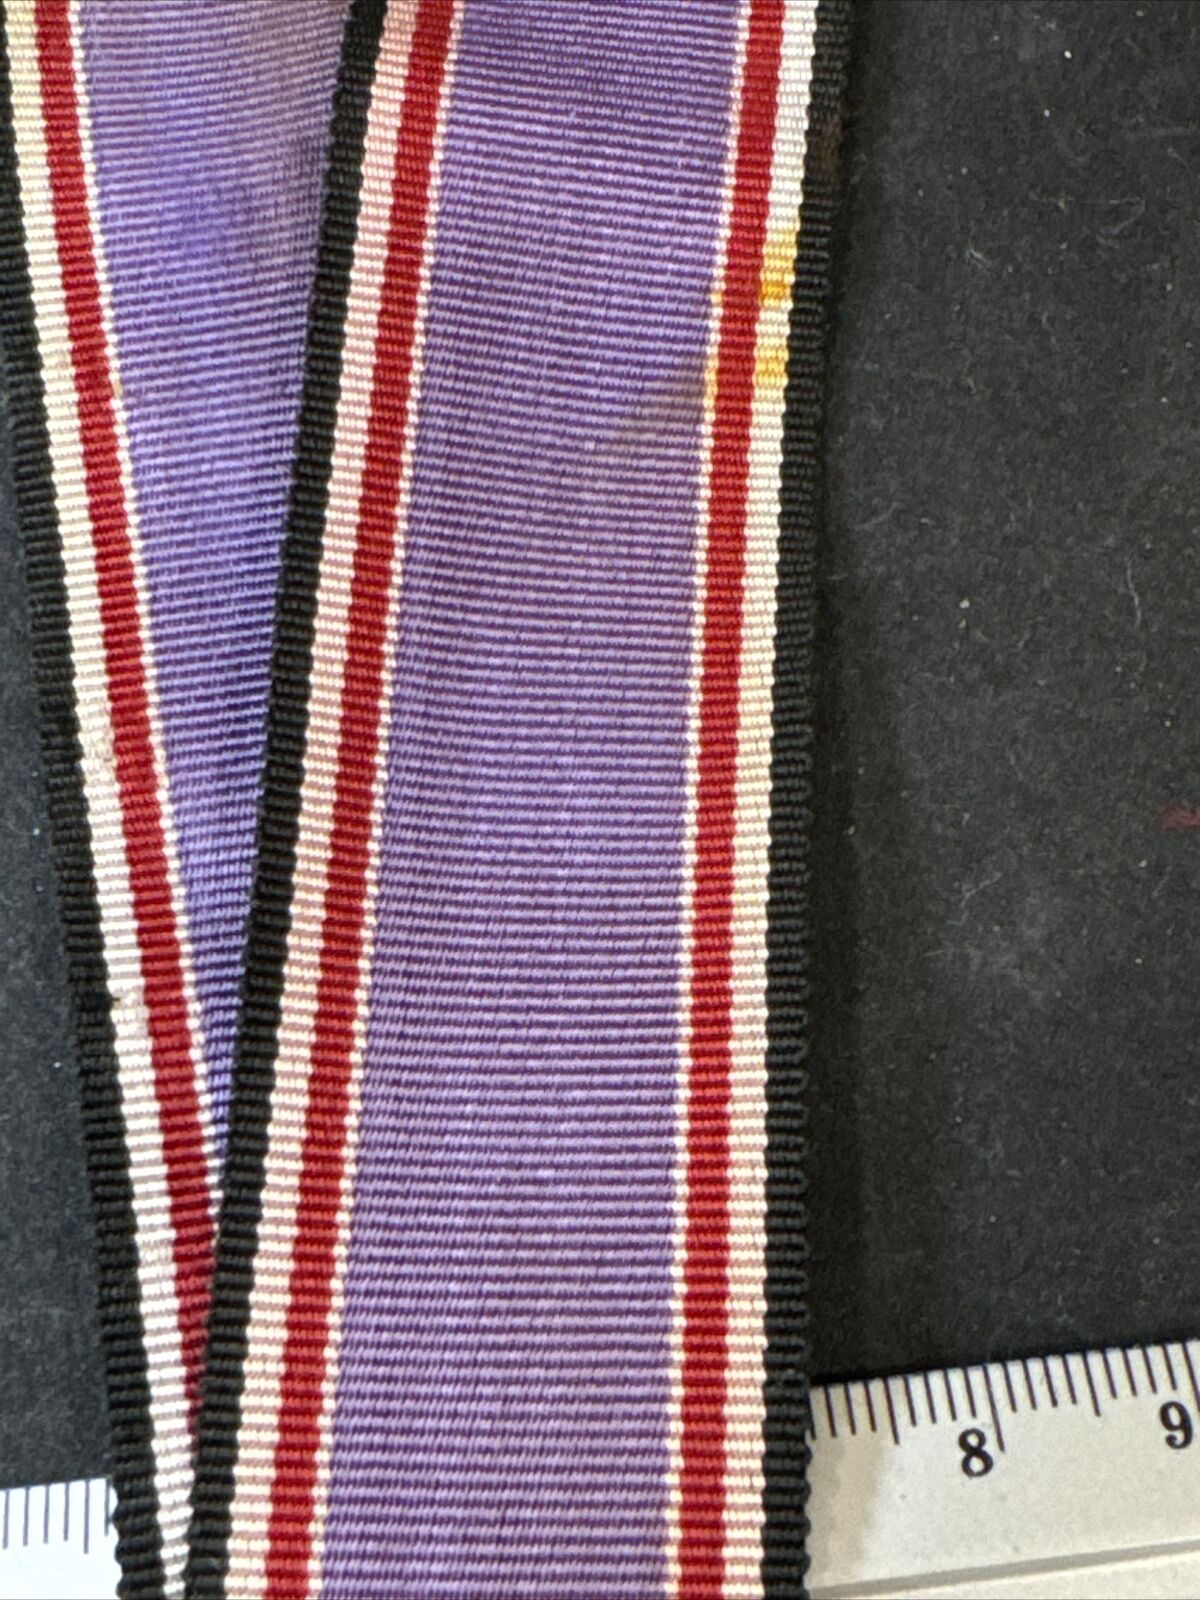 Germany  Ribbon for Long Service Medal 1938.  15.5 cm  / 6 inch